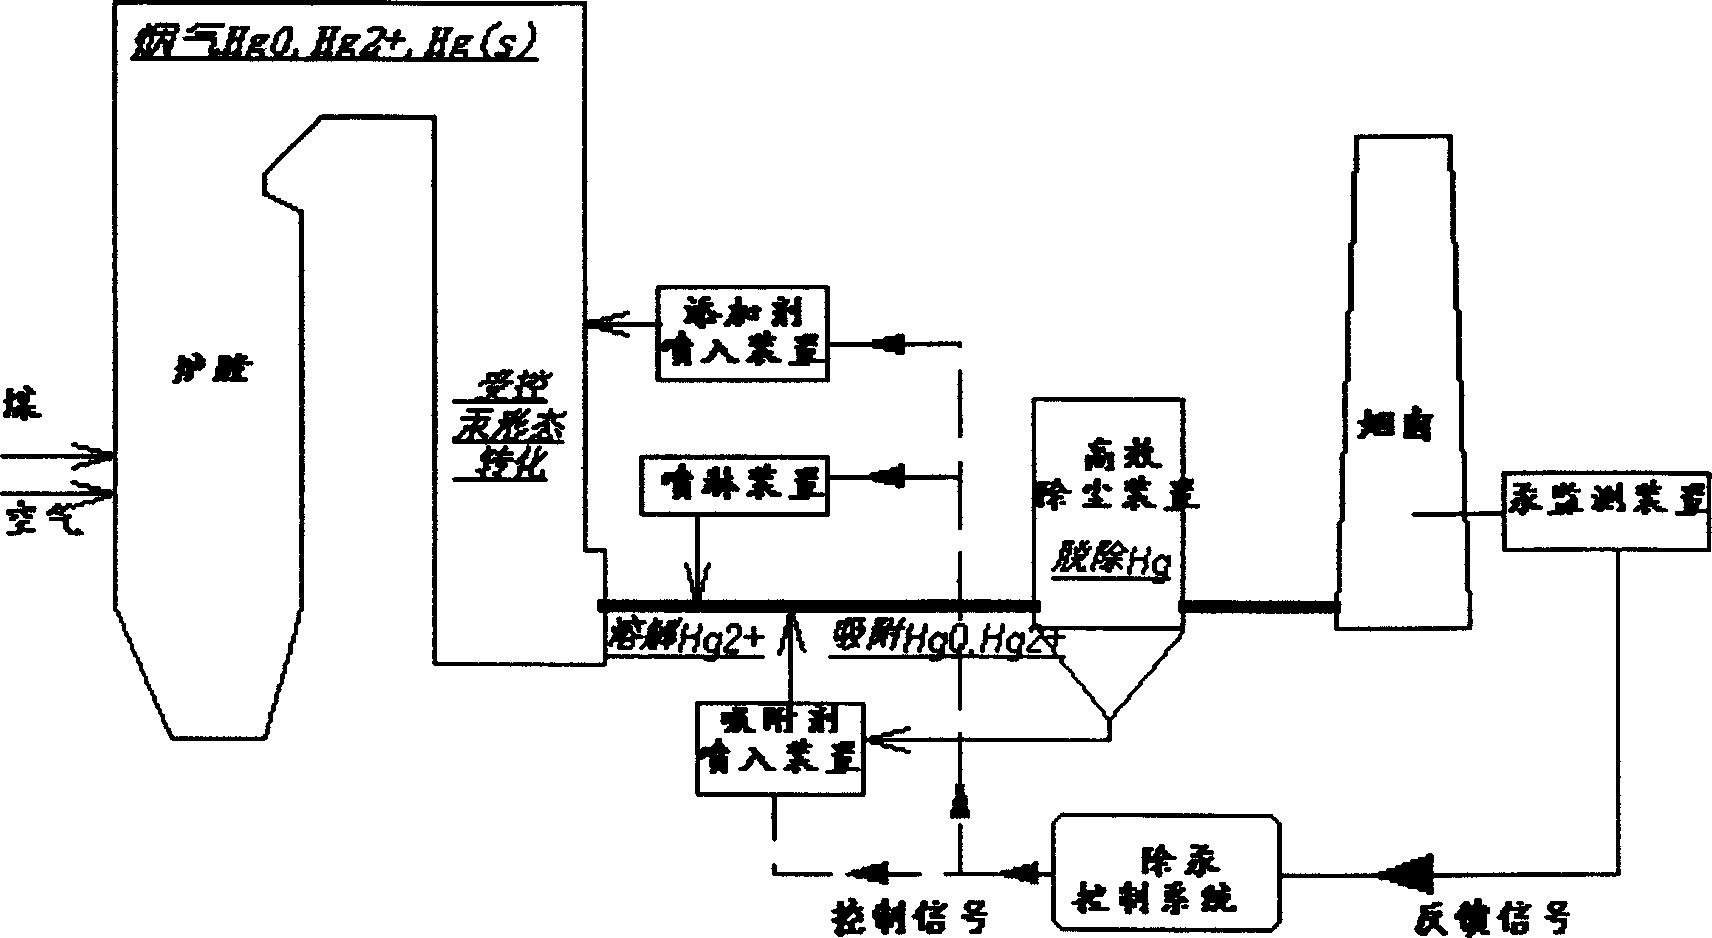 Coal-fired mercury discharge control method based on semi-dry process